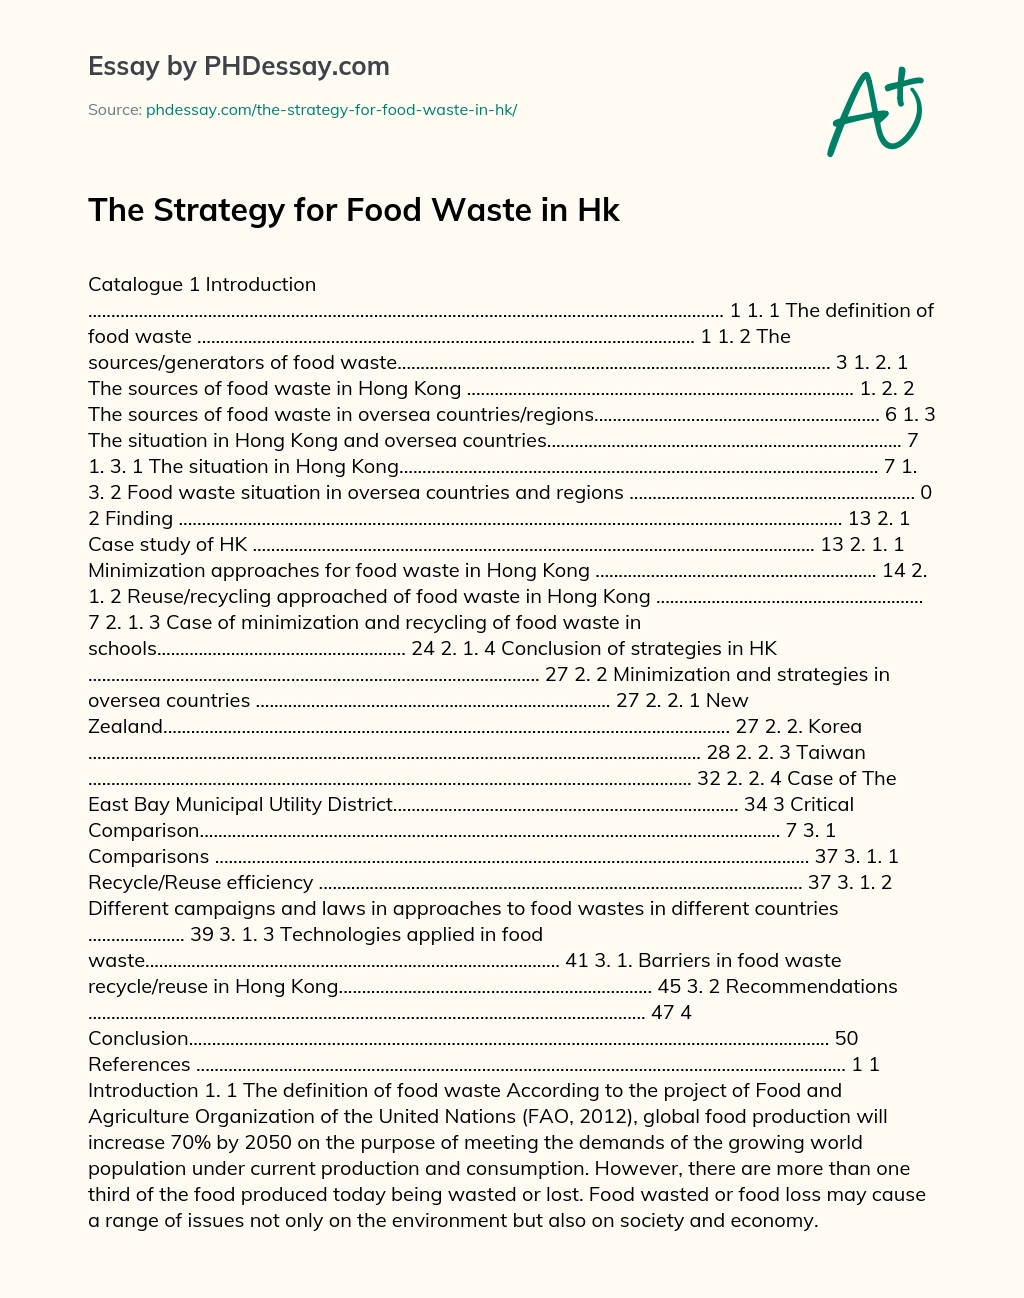 The Strategy for Food Waste in Hk essay